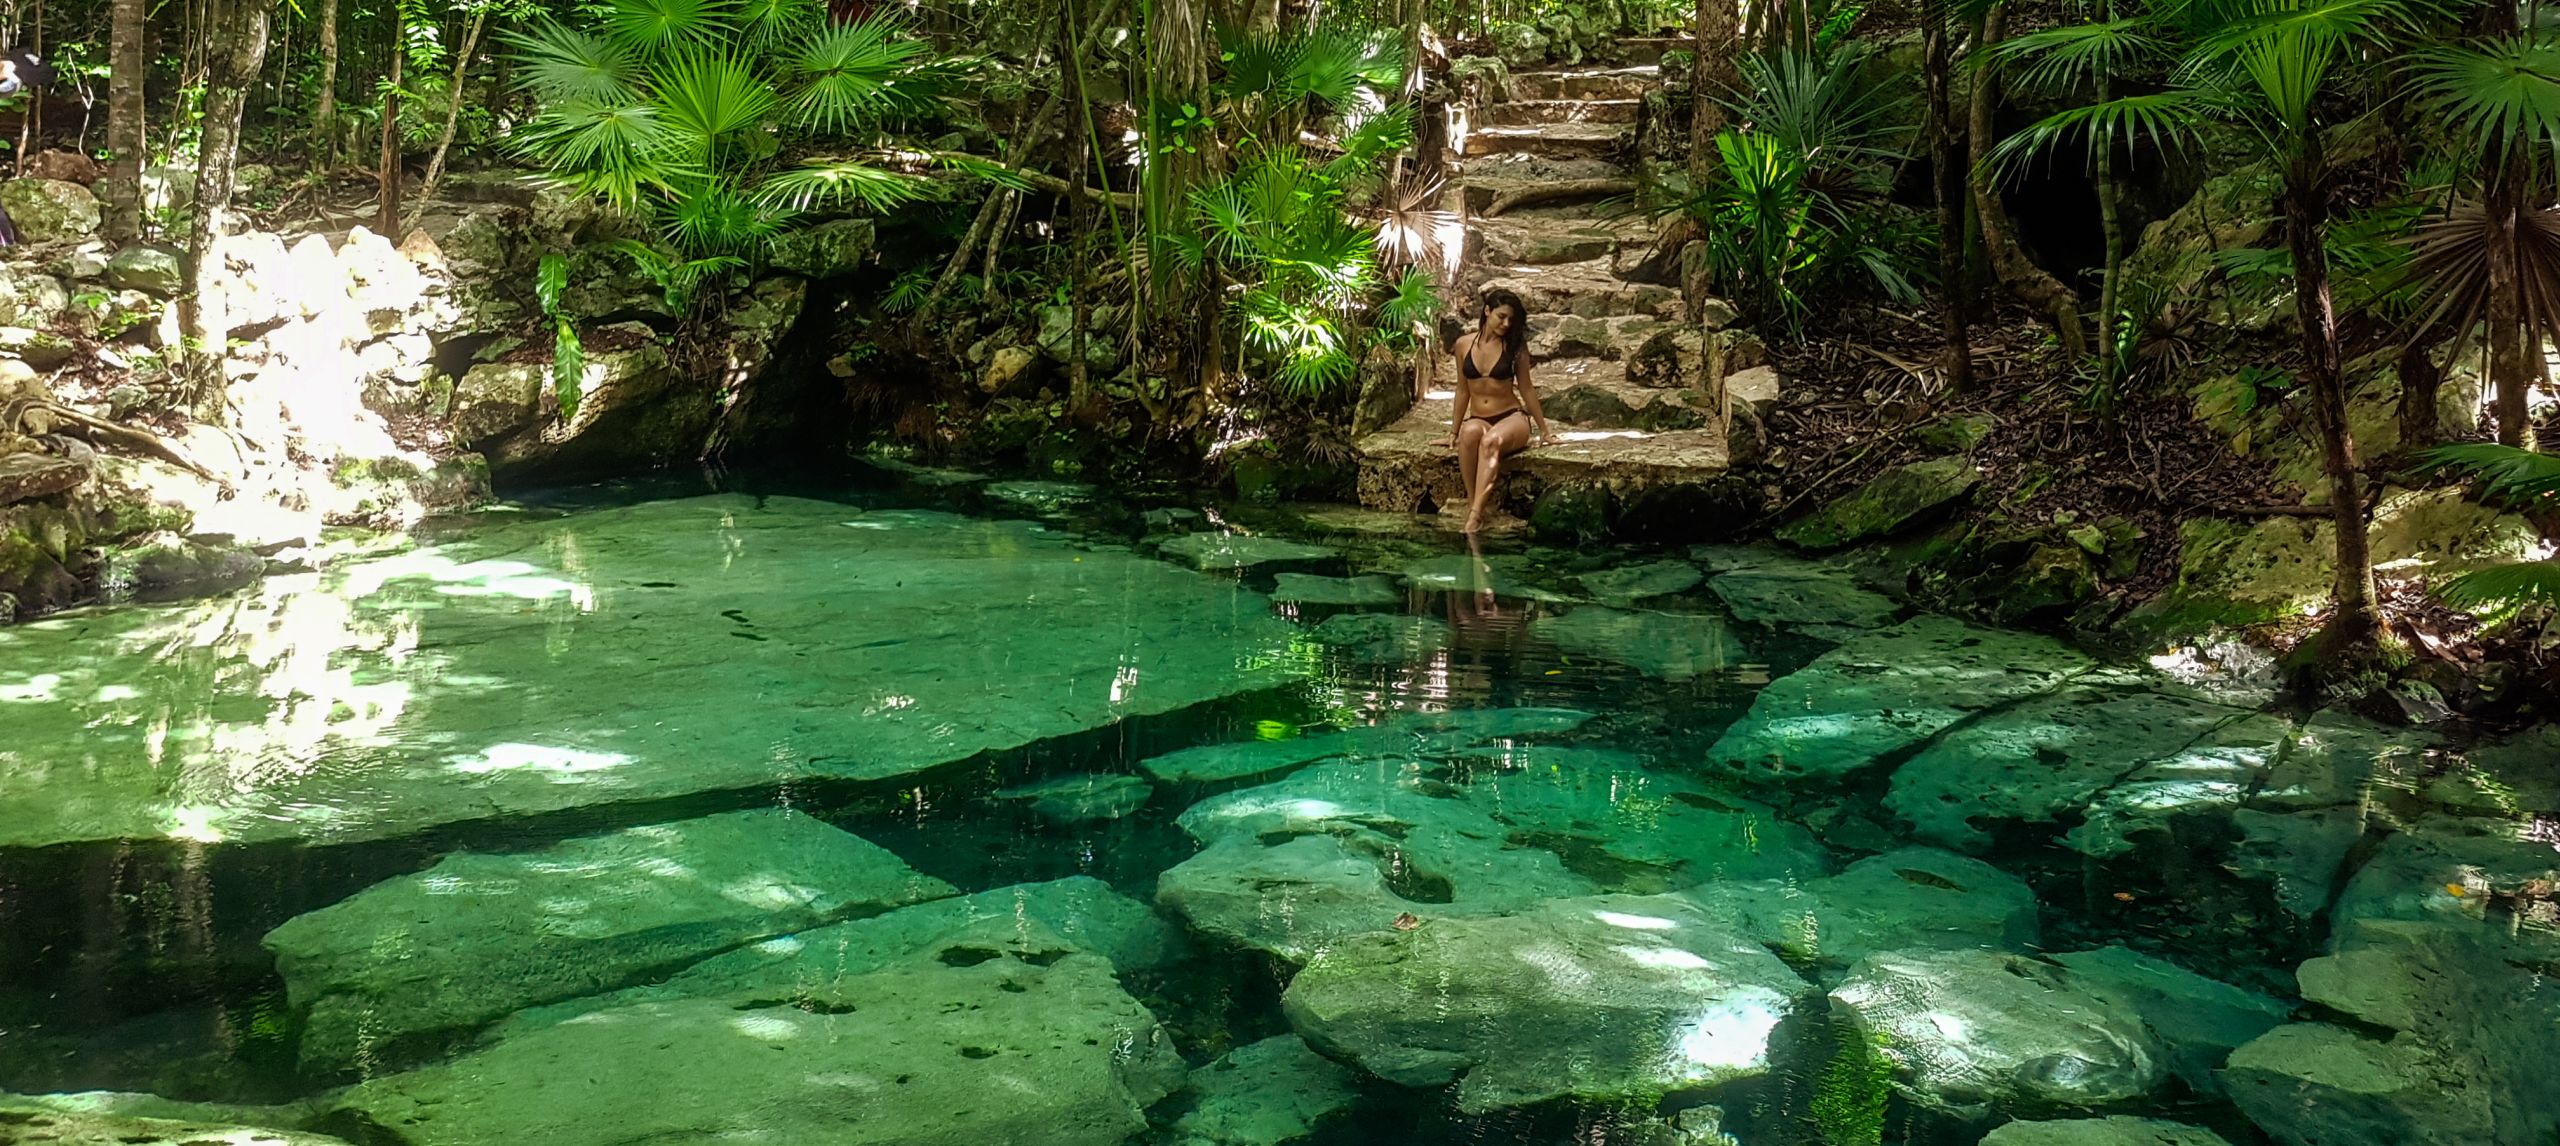 Woman sitting a pool in forest